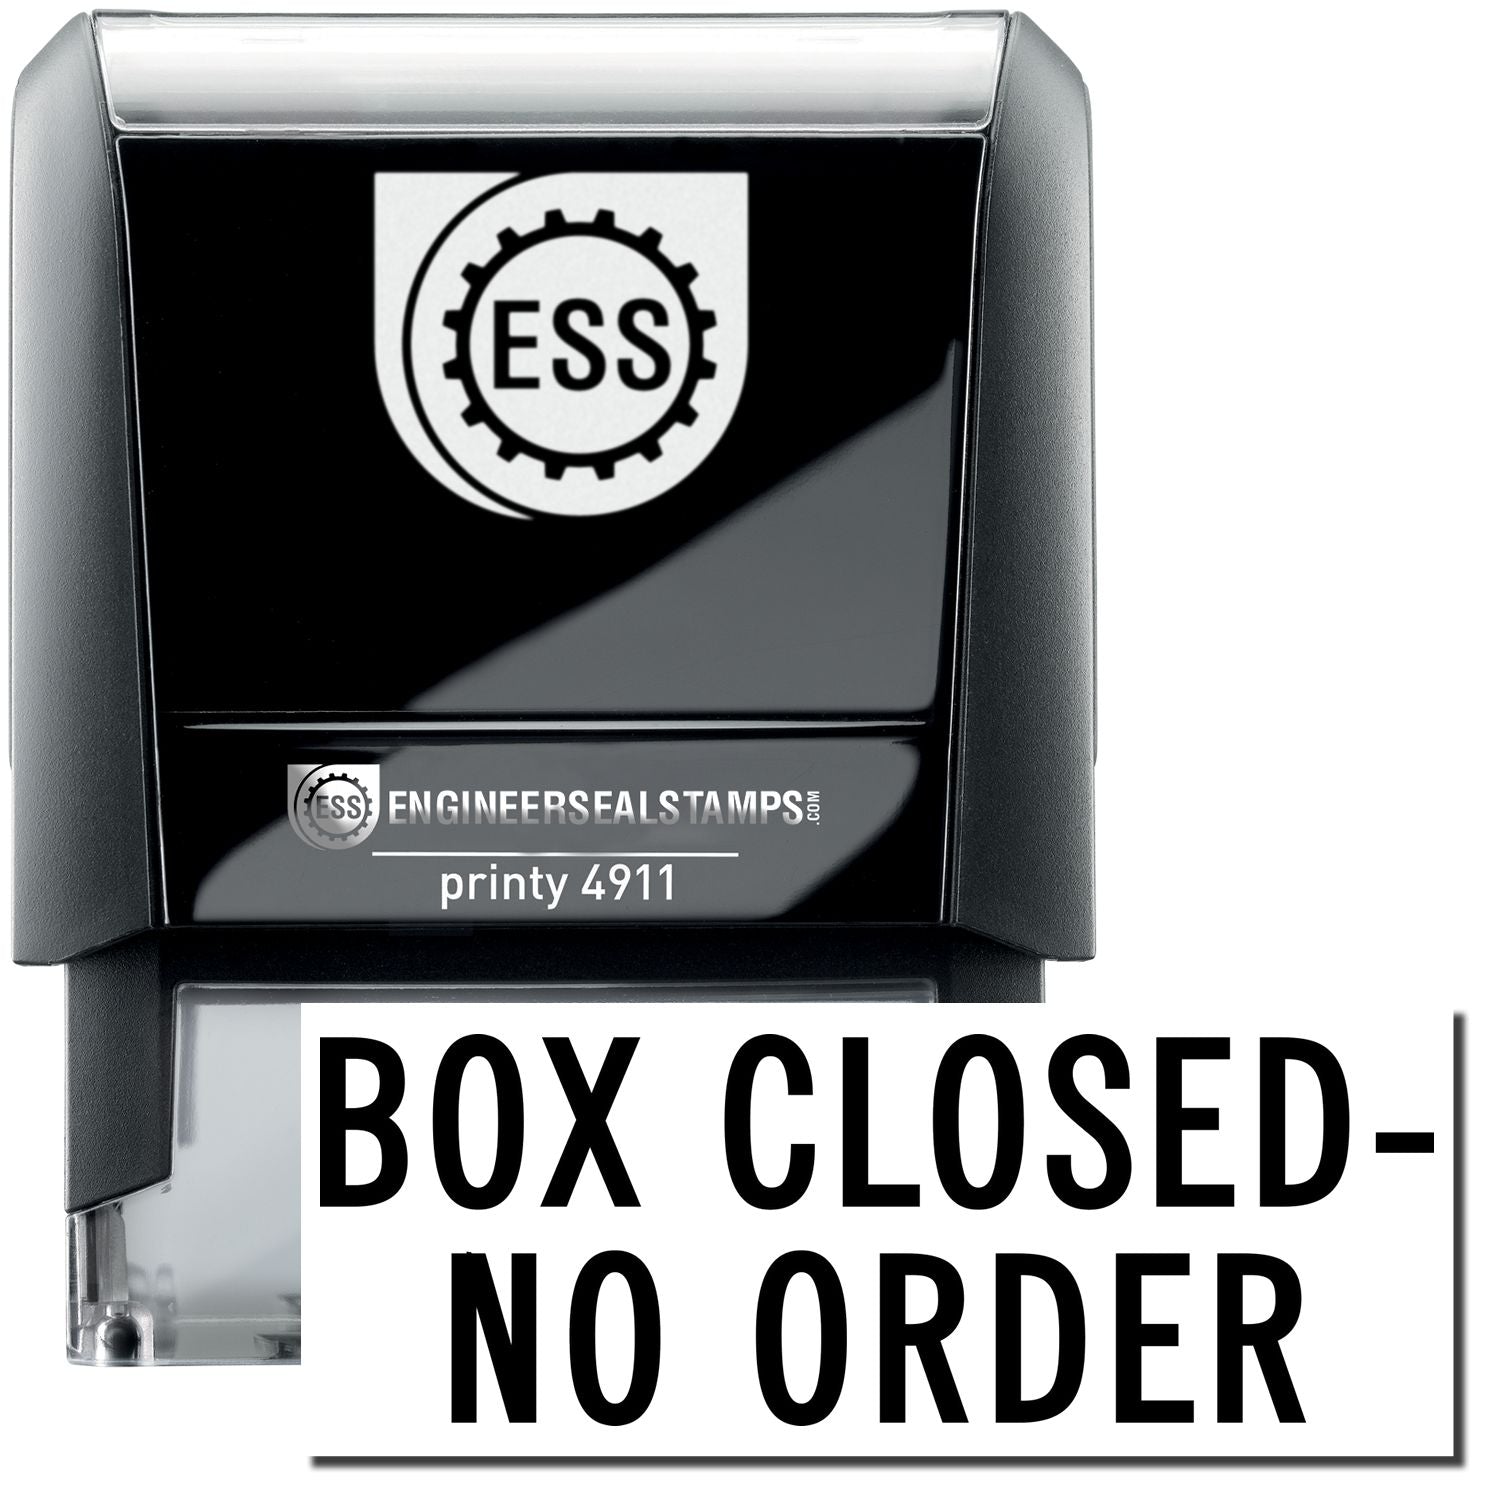 A self-inking stamp with a stamped image showing how the text "BOX CLOSED - NO ORDER" is displayed after stamping.